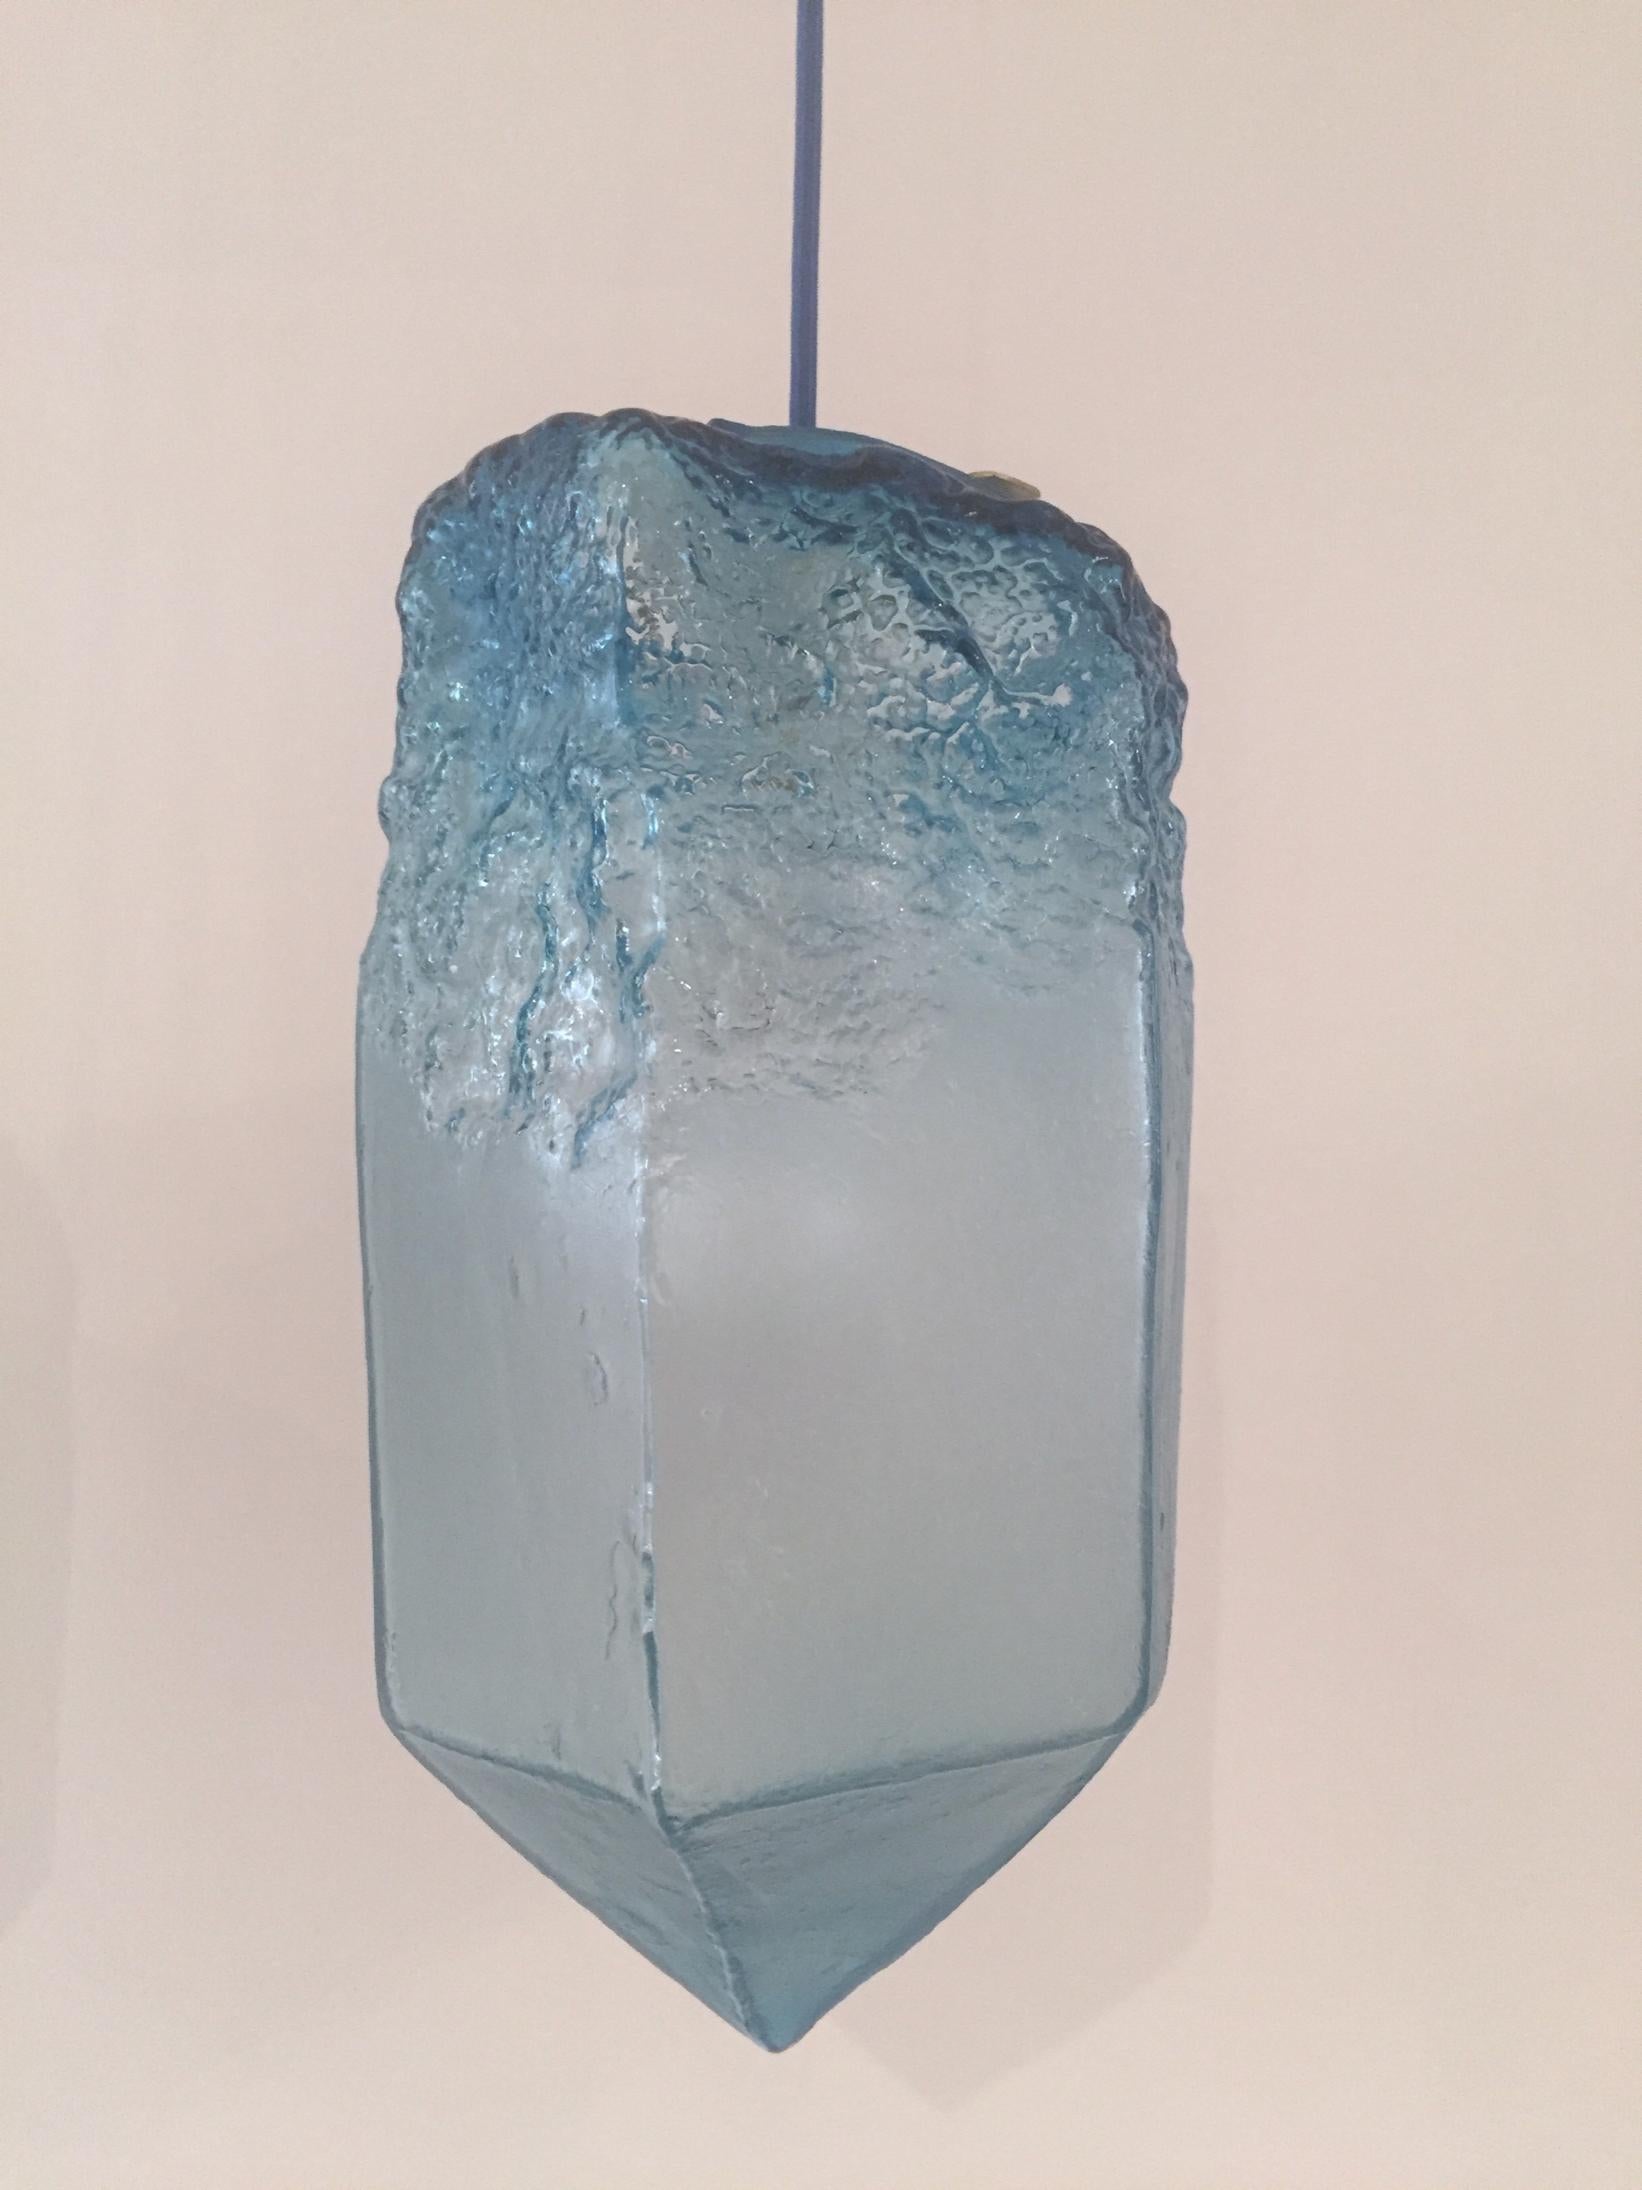 Crystal illuminated sculptural pendant in hand blown blue glass. Designed and made by Jeff Zimmerman, USA, 2016.

Limited number available. Please note that each item may differ slightly in color and shape.